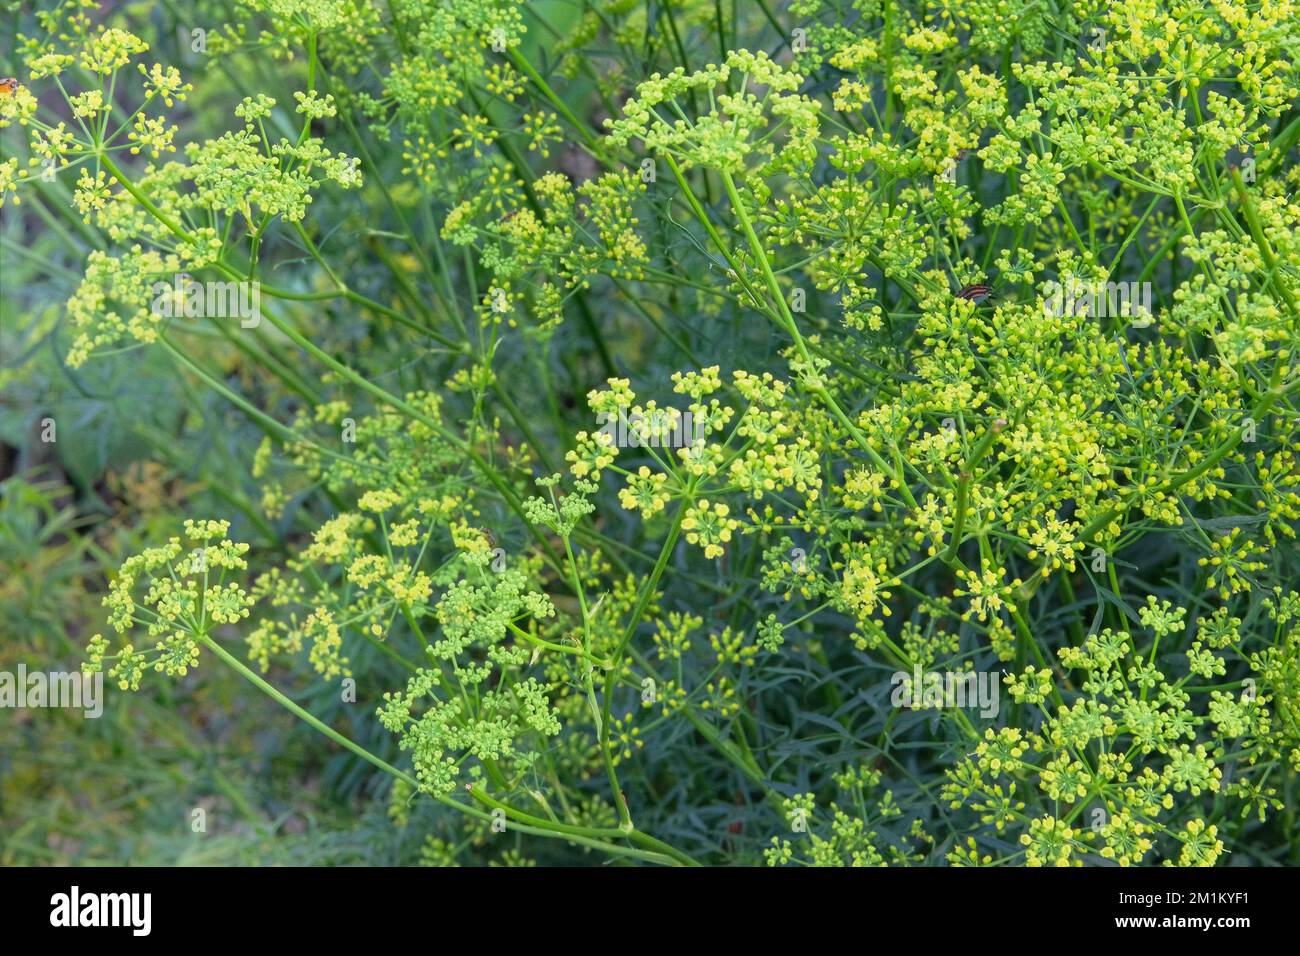 Anise. Gentle summer flowers on blurred background of green grass. Summer green meadow. Stock Photo